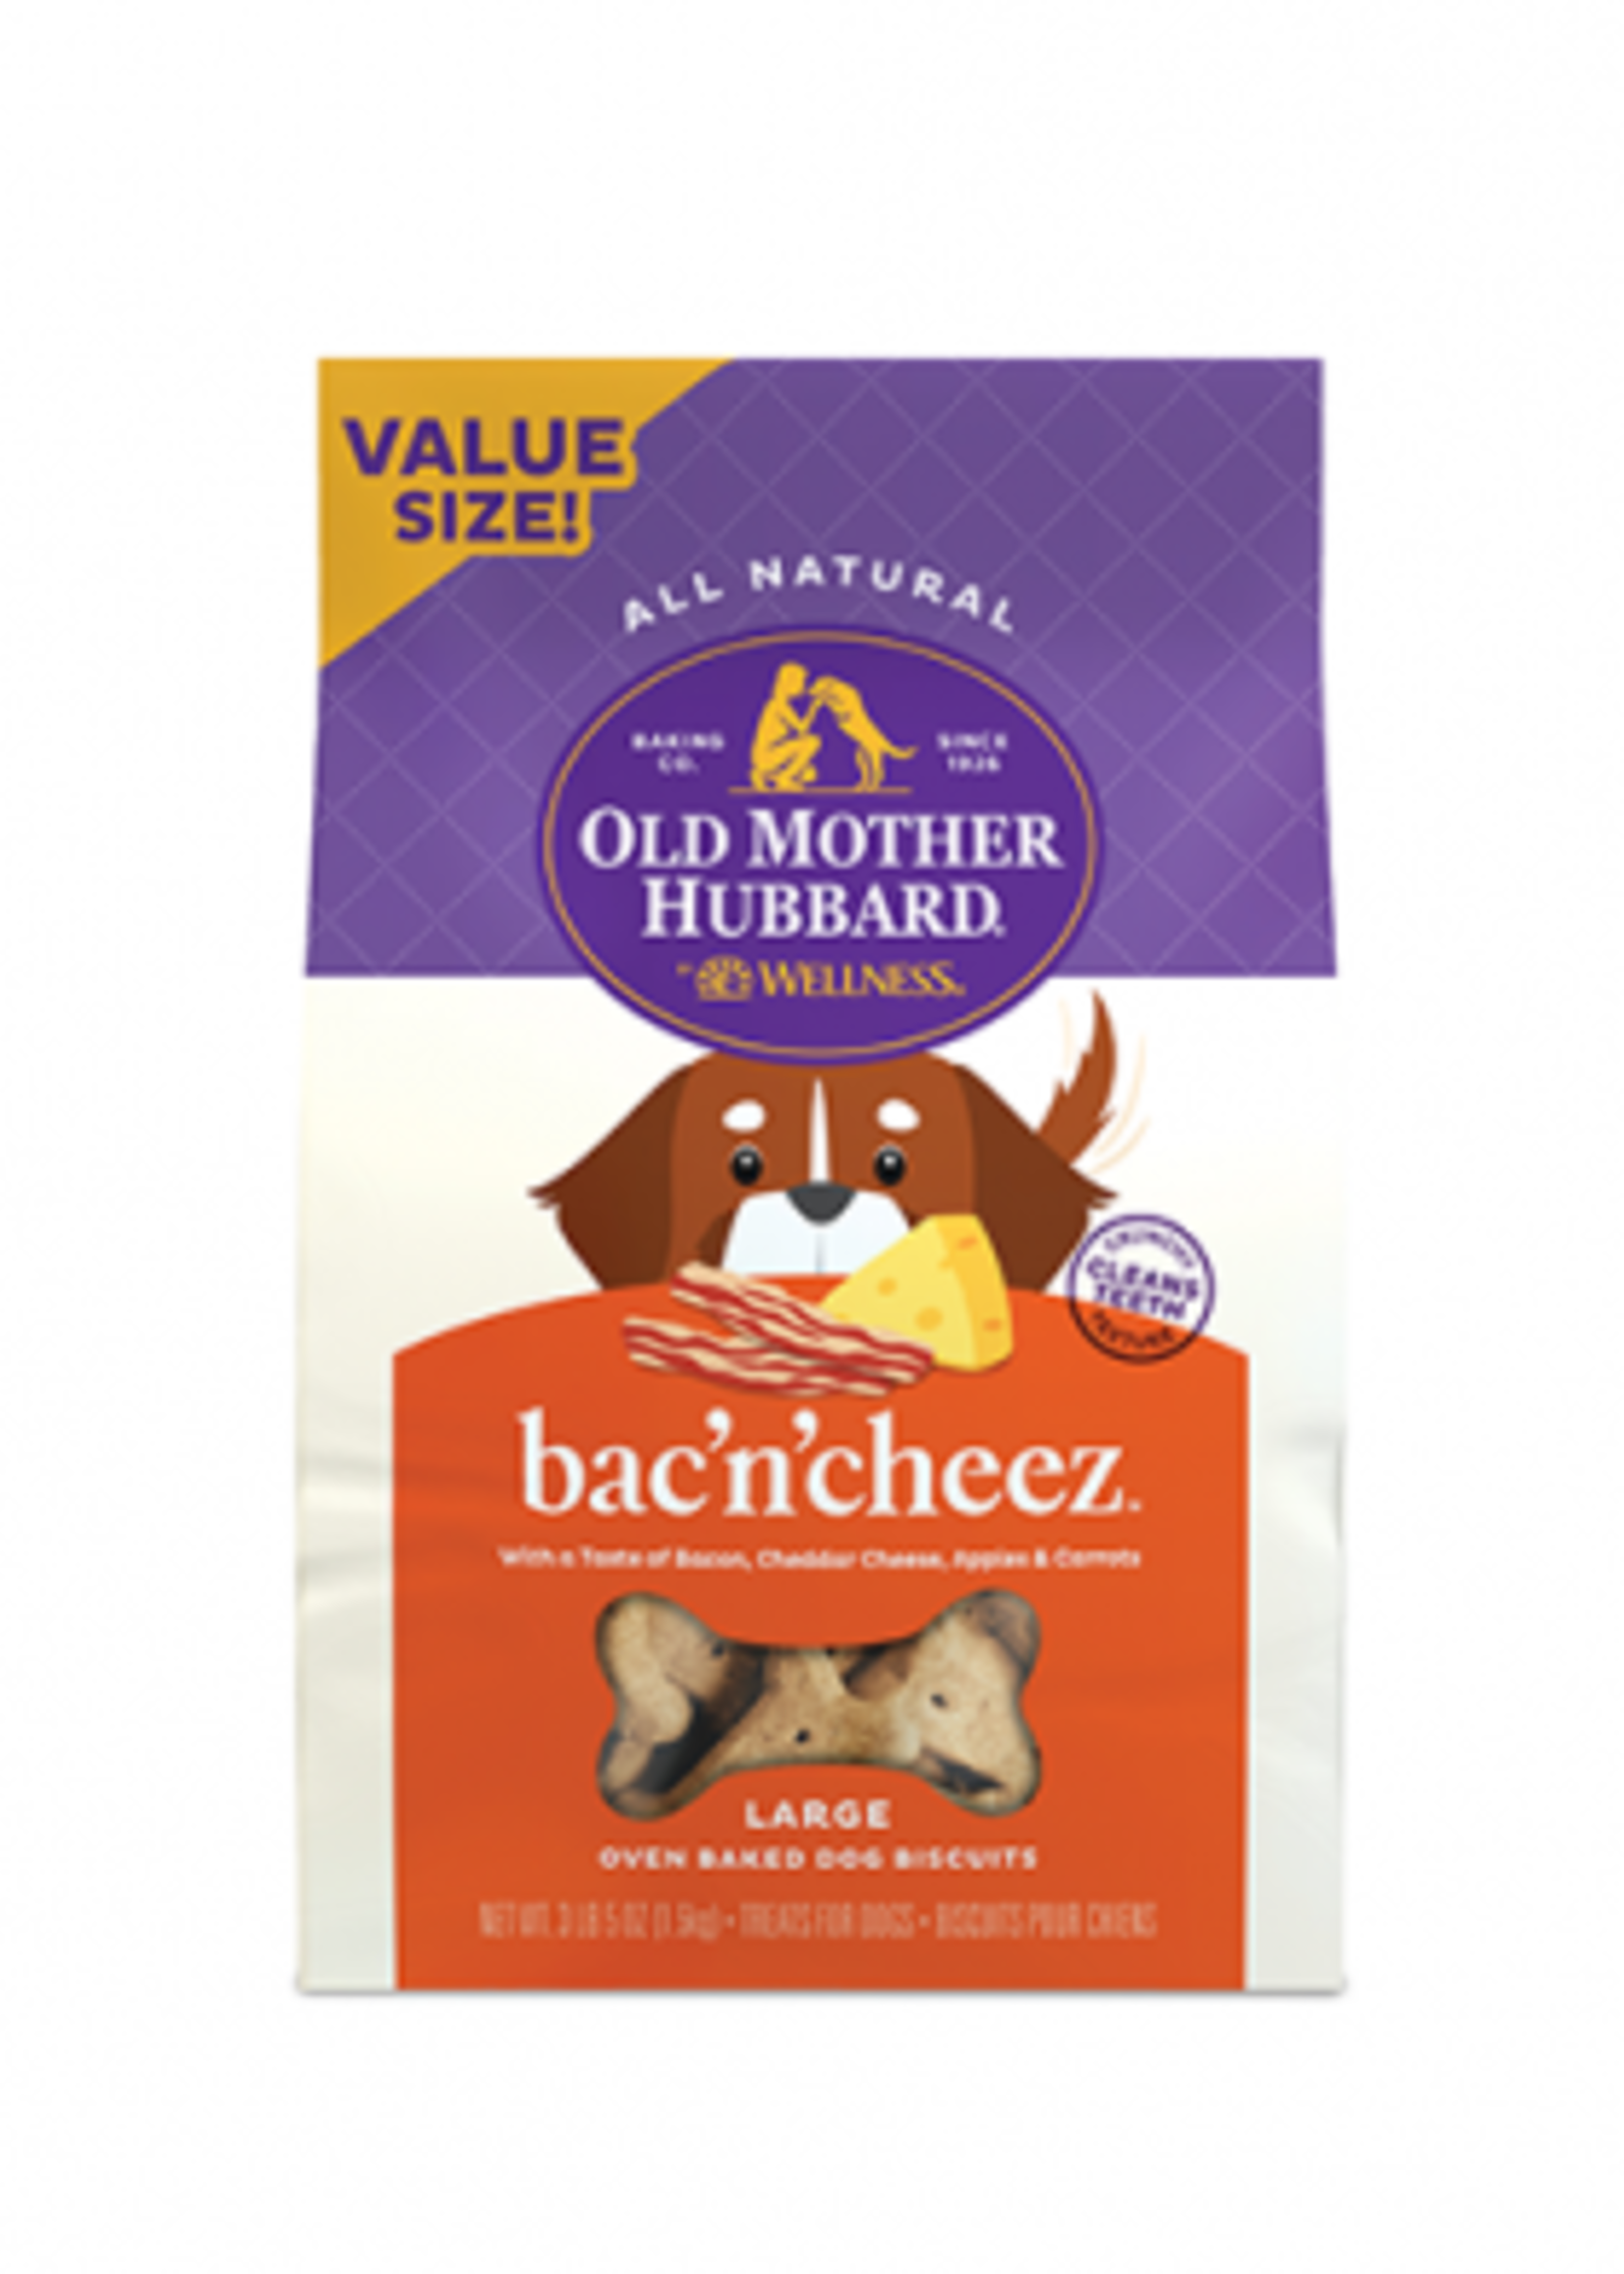 Old Mother Hubbard® Wellness Old Mother Hubbard® Classic Bac'n'Cheez® Oven-Baked Biscuits 3.5lbs